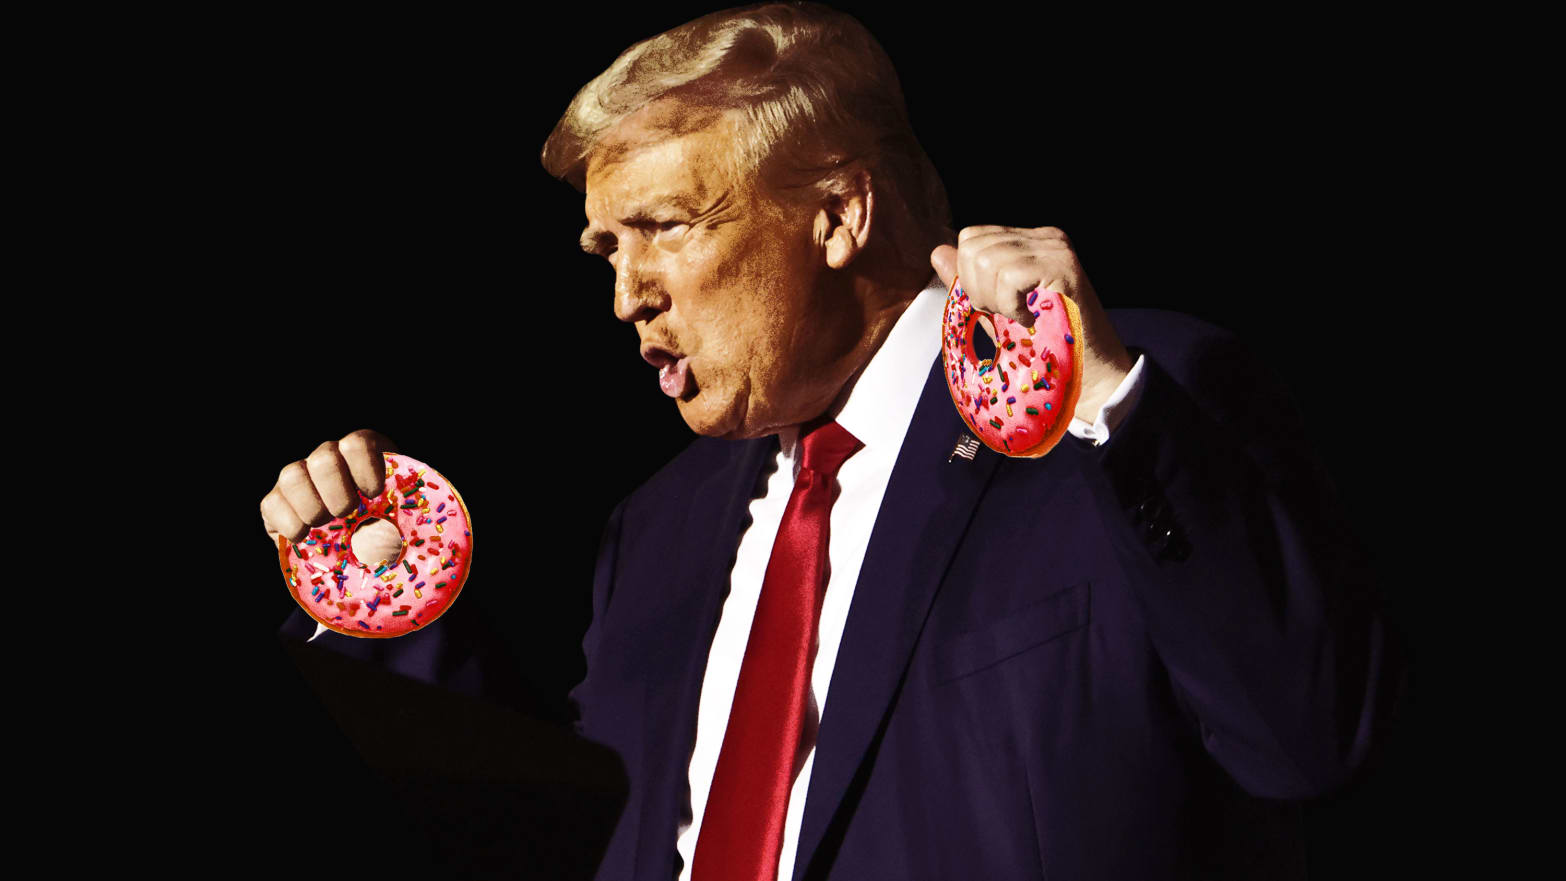 A photo illustration of Donald Trump shouting while holding two pink glazed donuts in both hands.